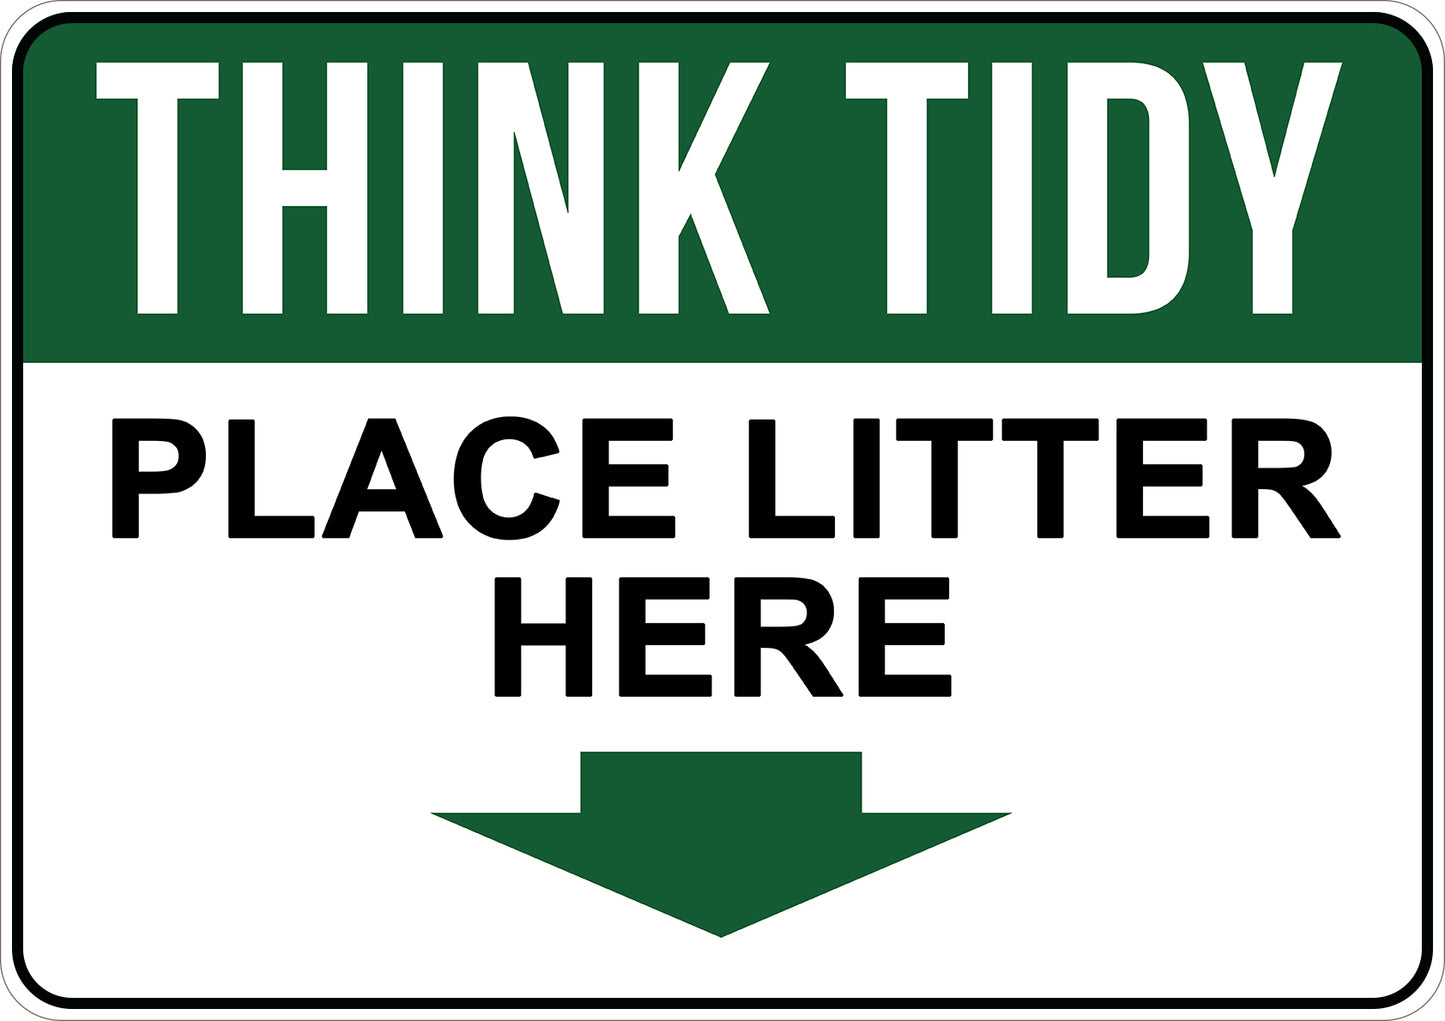 Place Litter Here Printed Sign